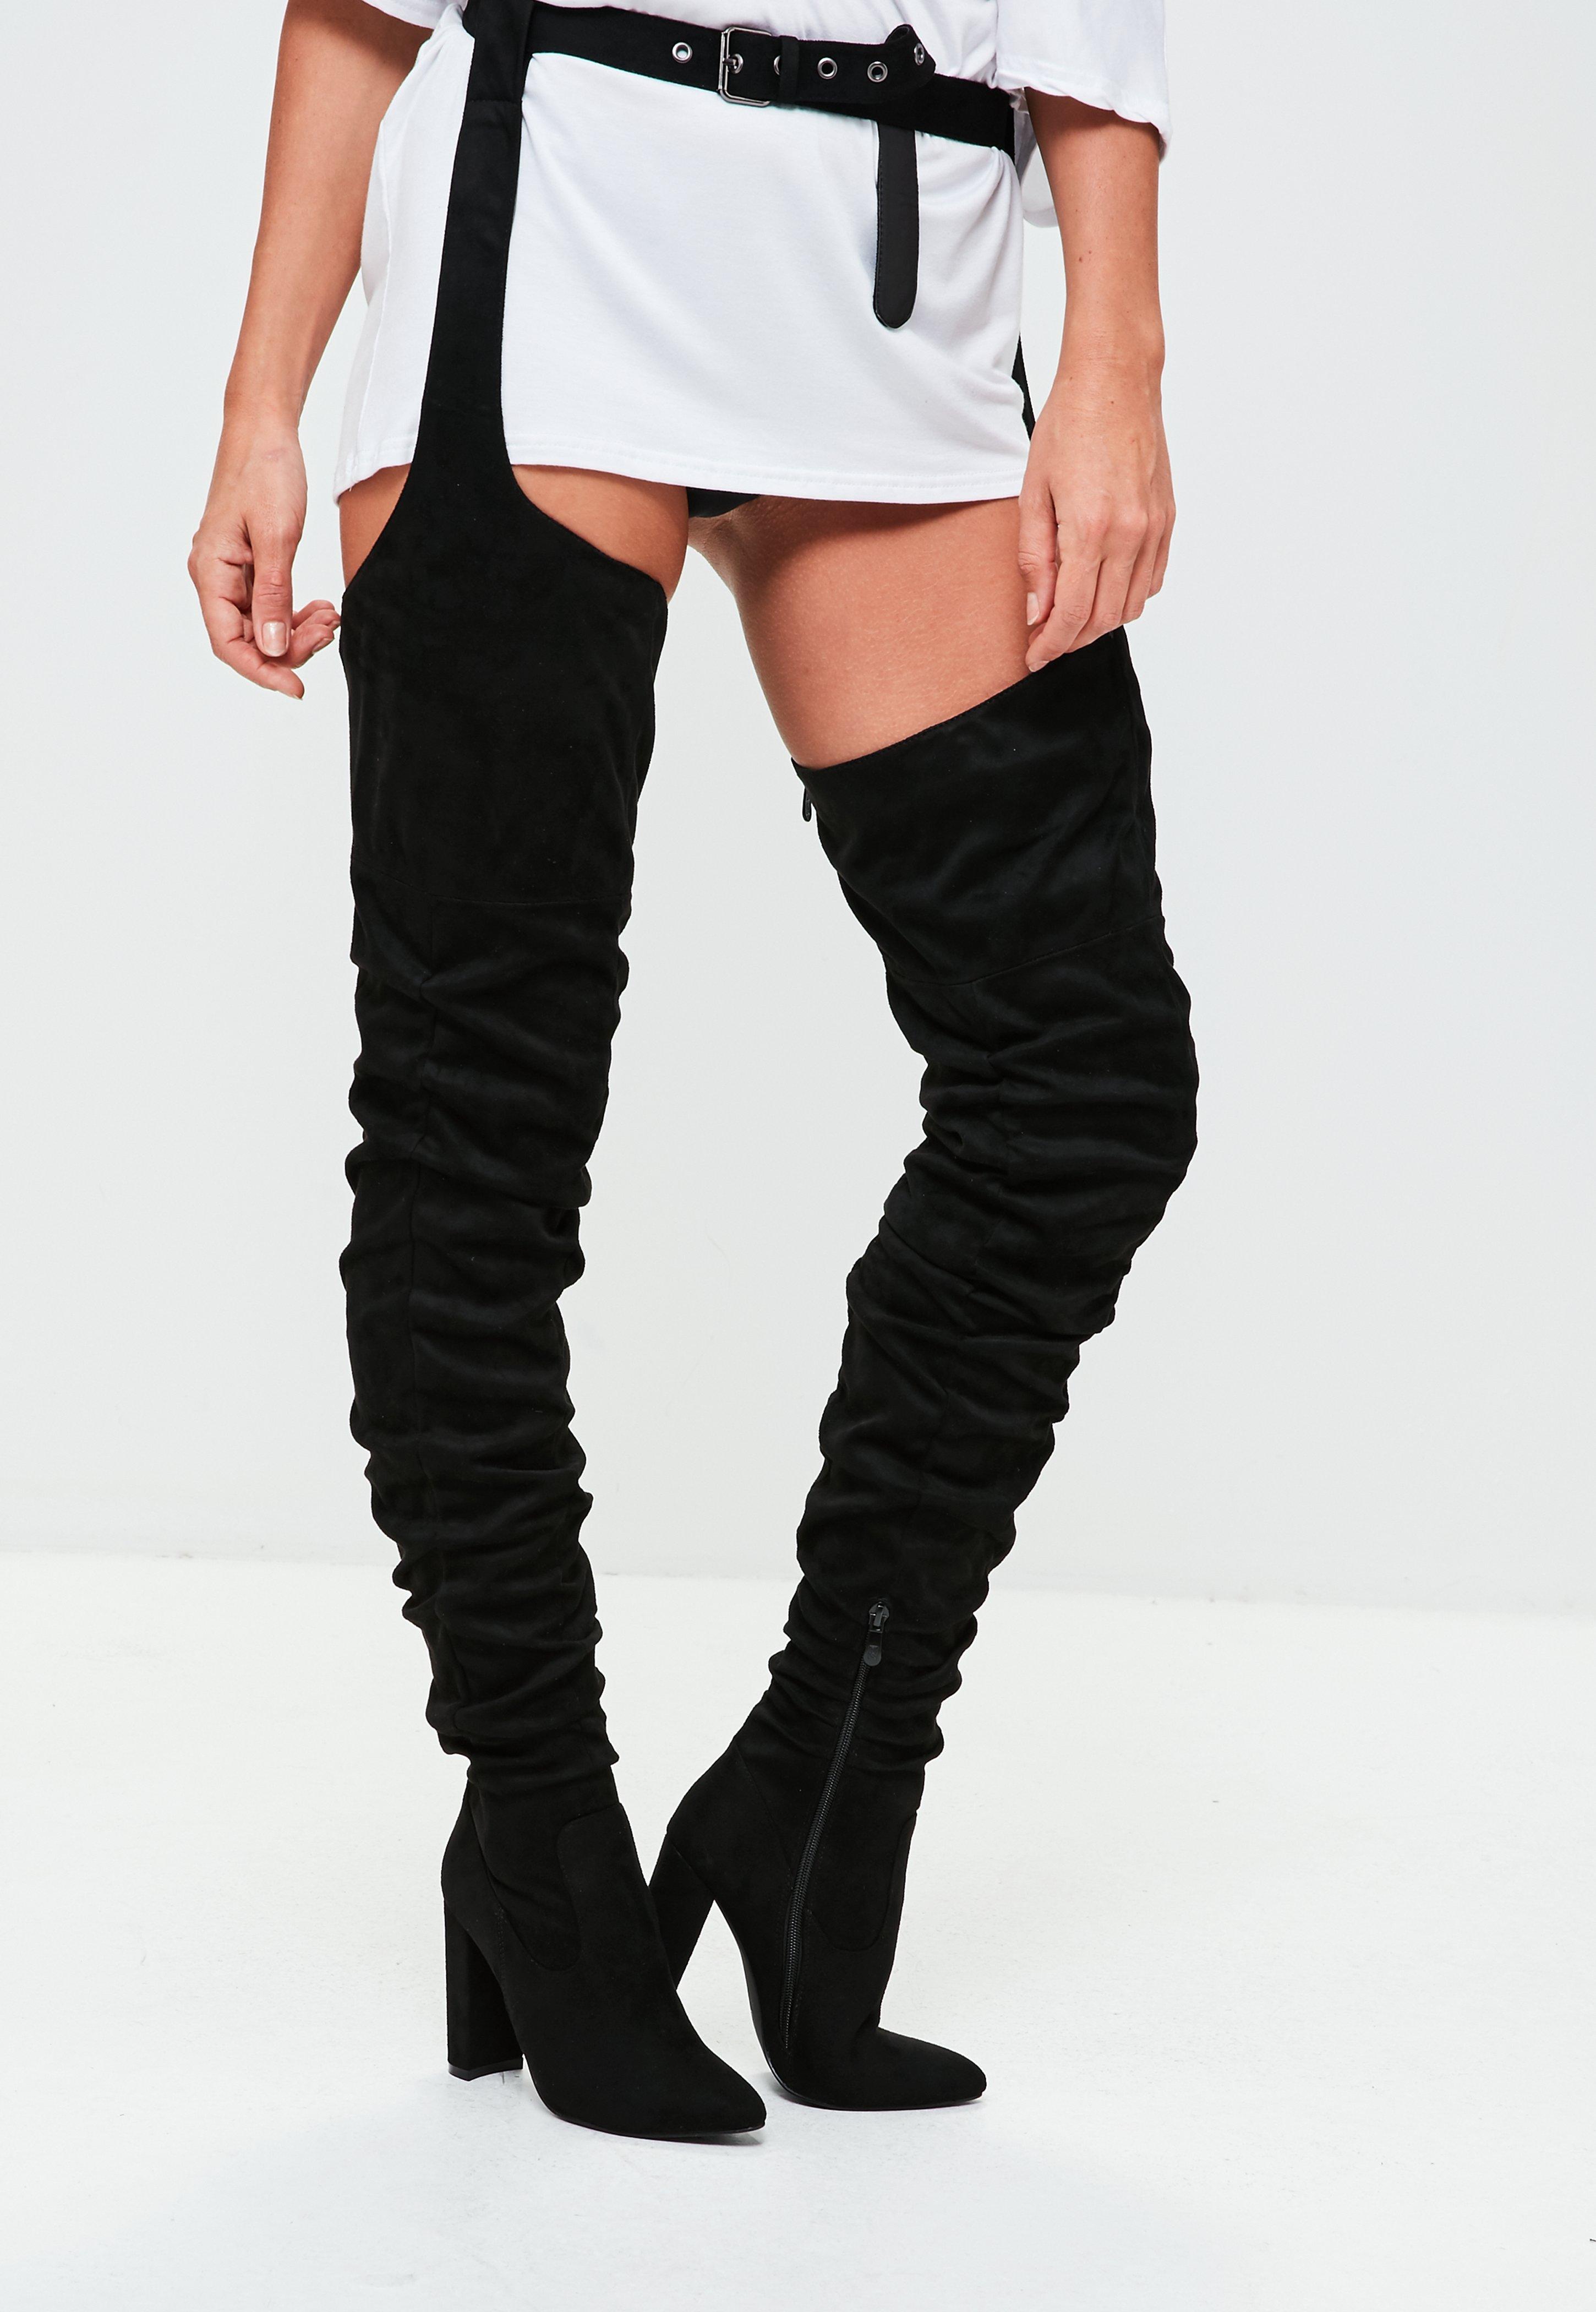 harness thigh high boots